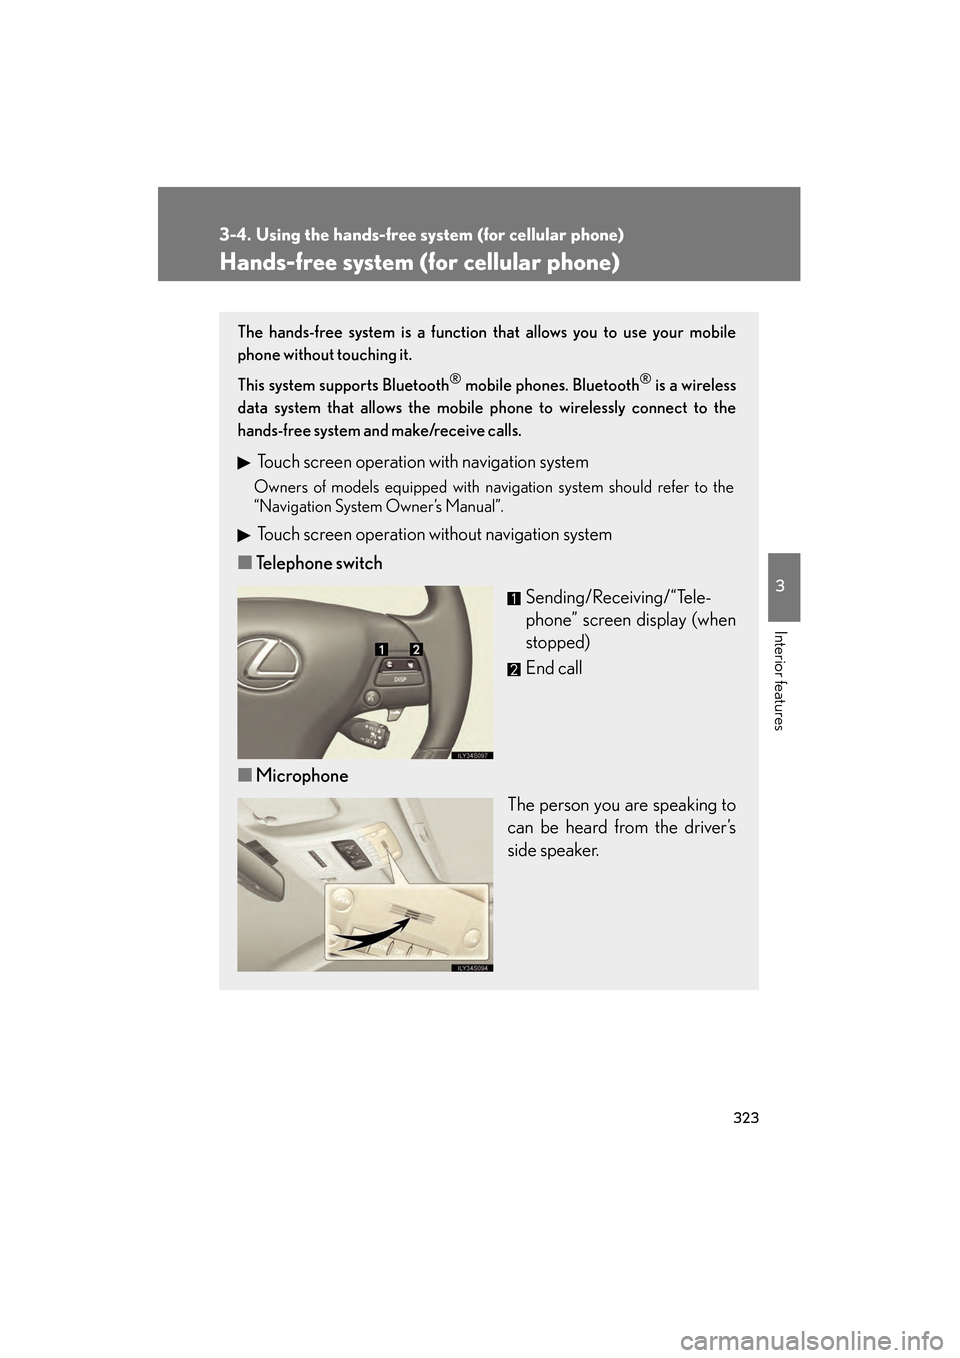 Lexus GS450h 2009  Owners Manual 323
3
Interior features
GS_HV_U (OM30B44U)
April 27, 2009 10:09 am
3-4. Using the hands-free system (for cellular phone)
Hands-free system (for cellular phone)
The hands-free system is a function that